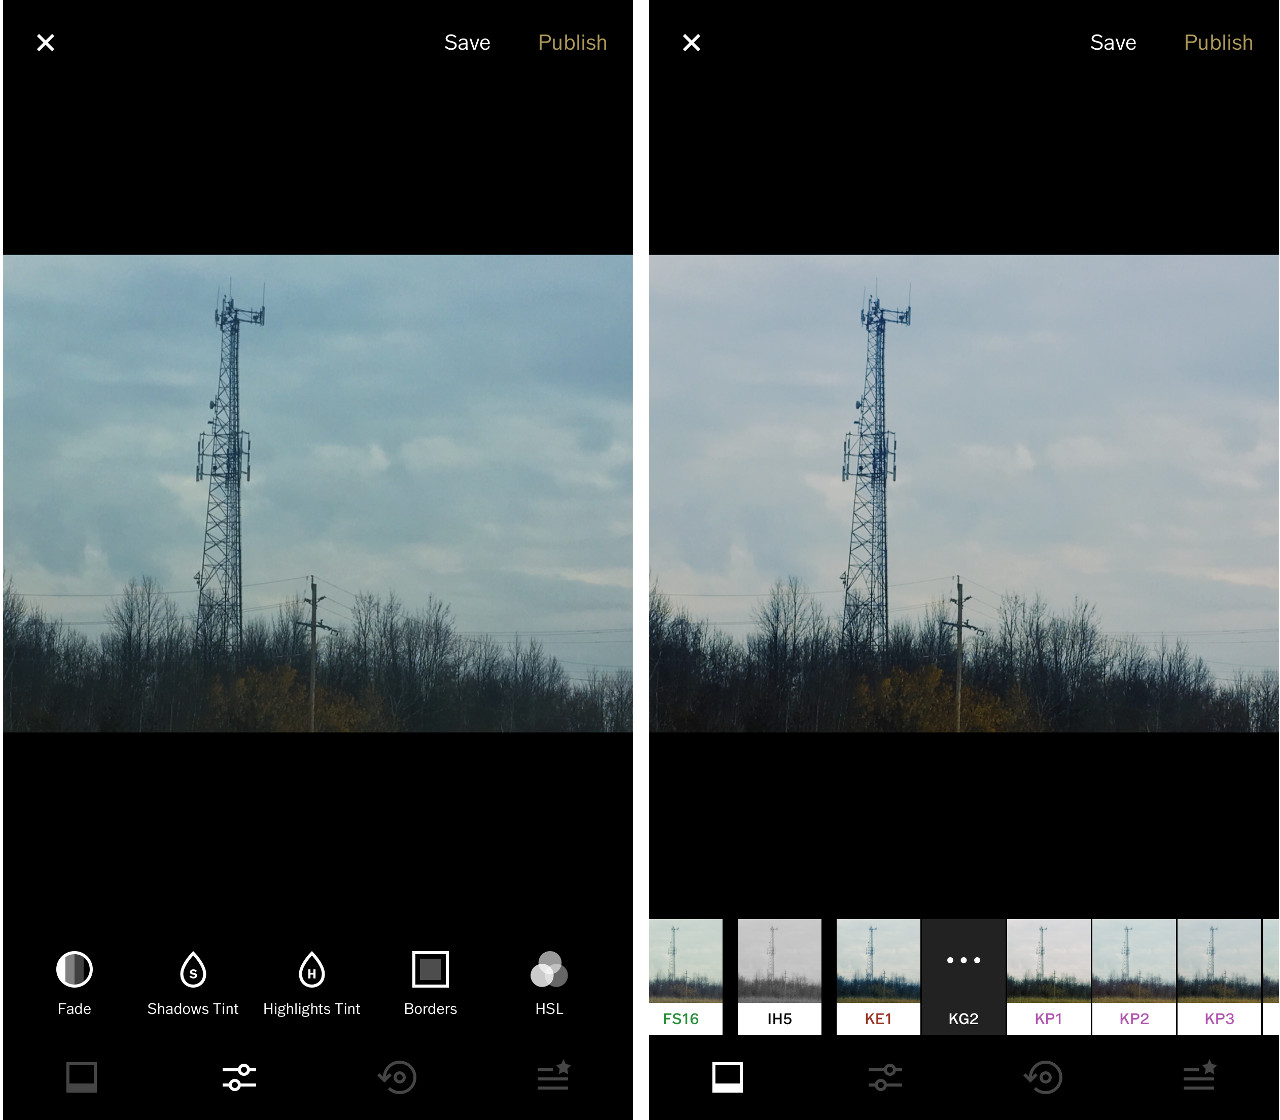 Editing and adding filters to photos in VSCO